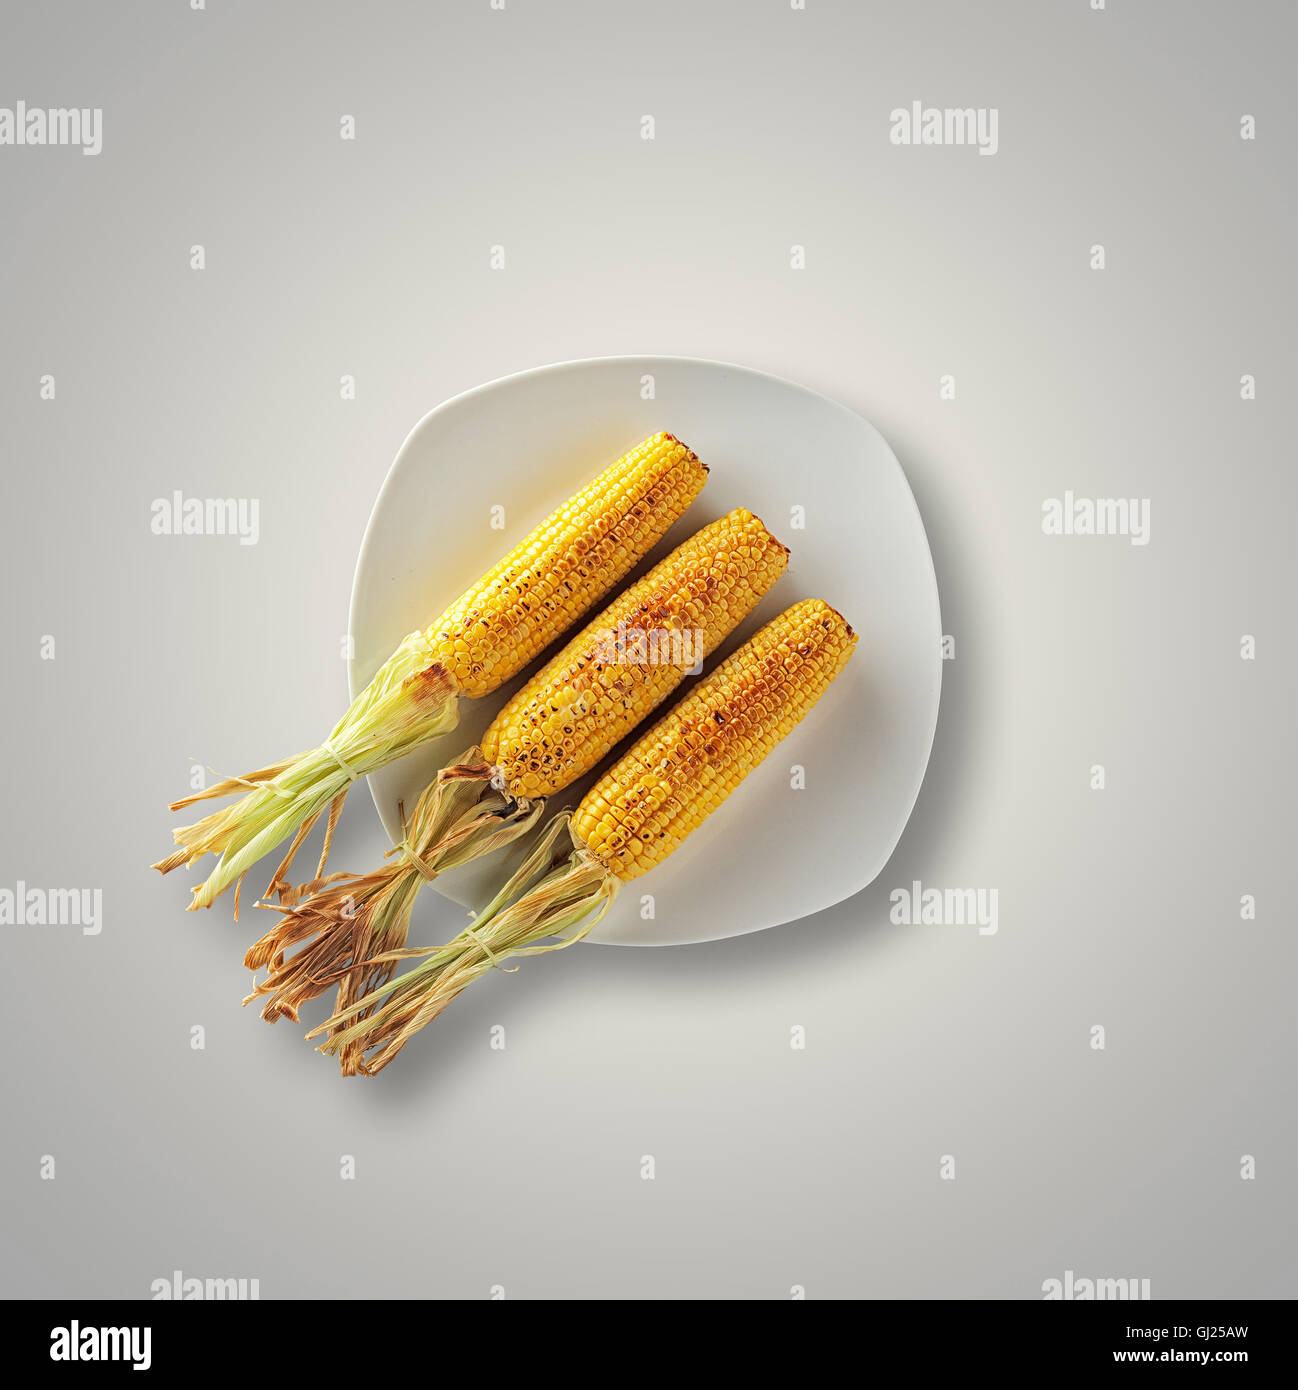 Whole Grilled Sweet Corn on a white plate and table from above Stock Photo